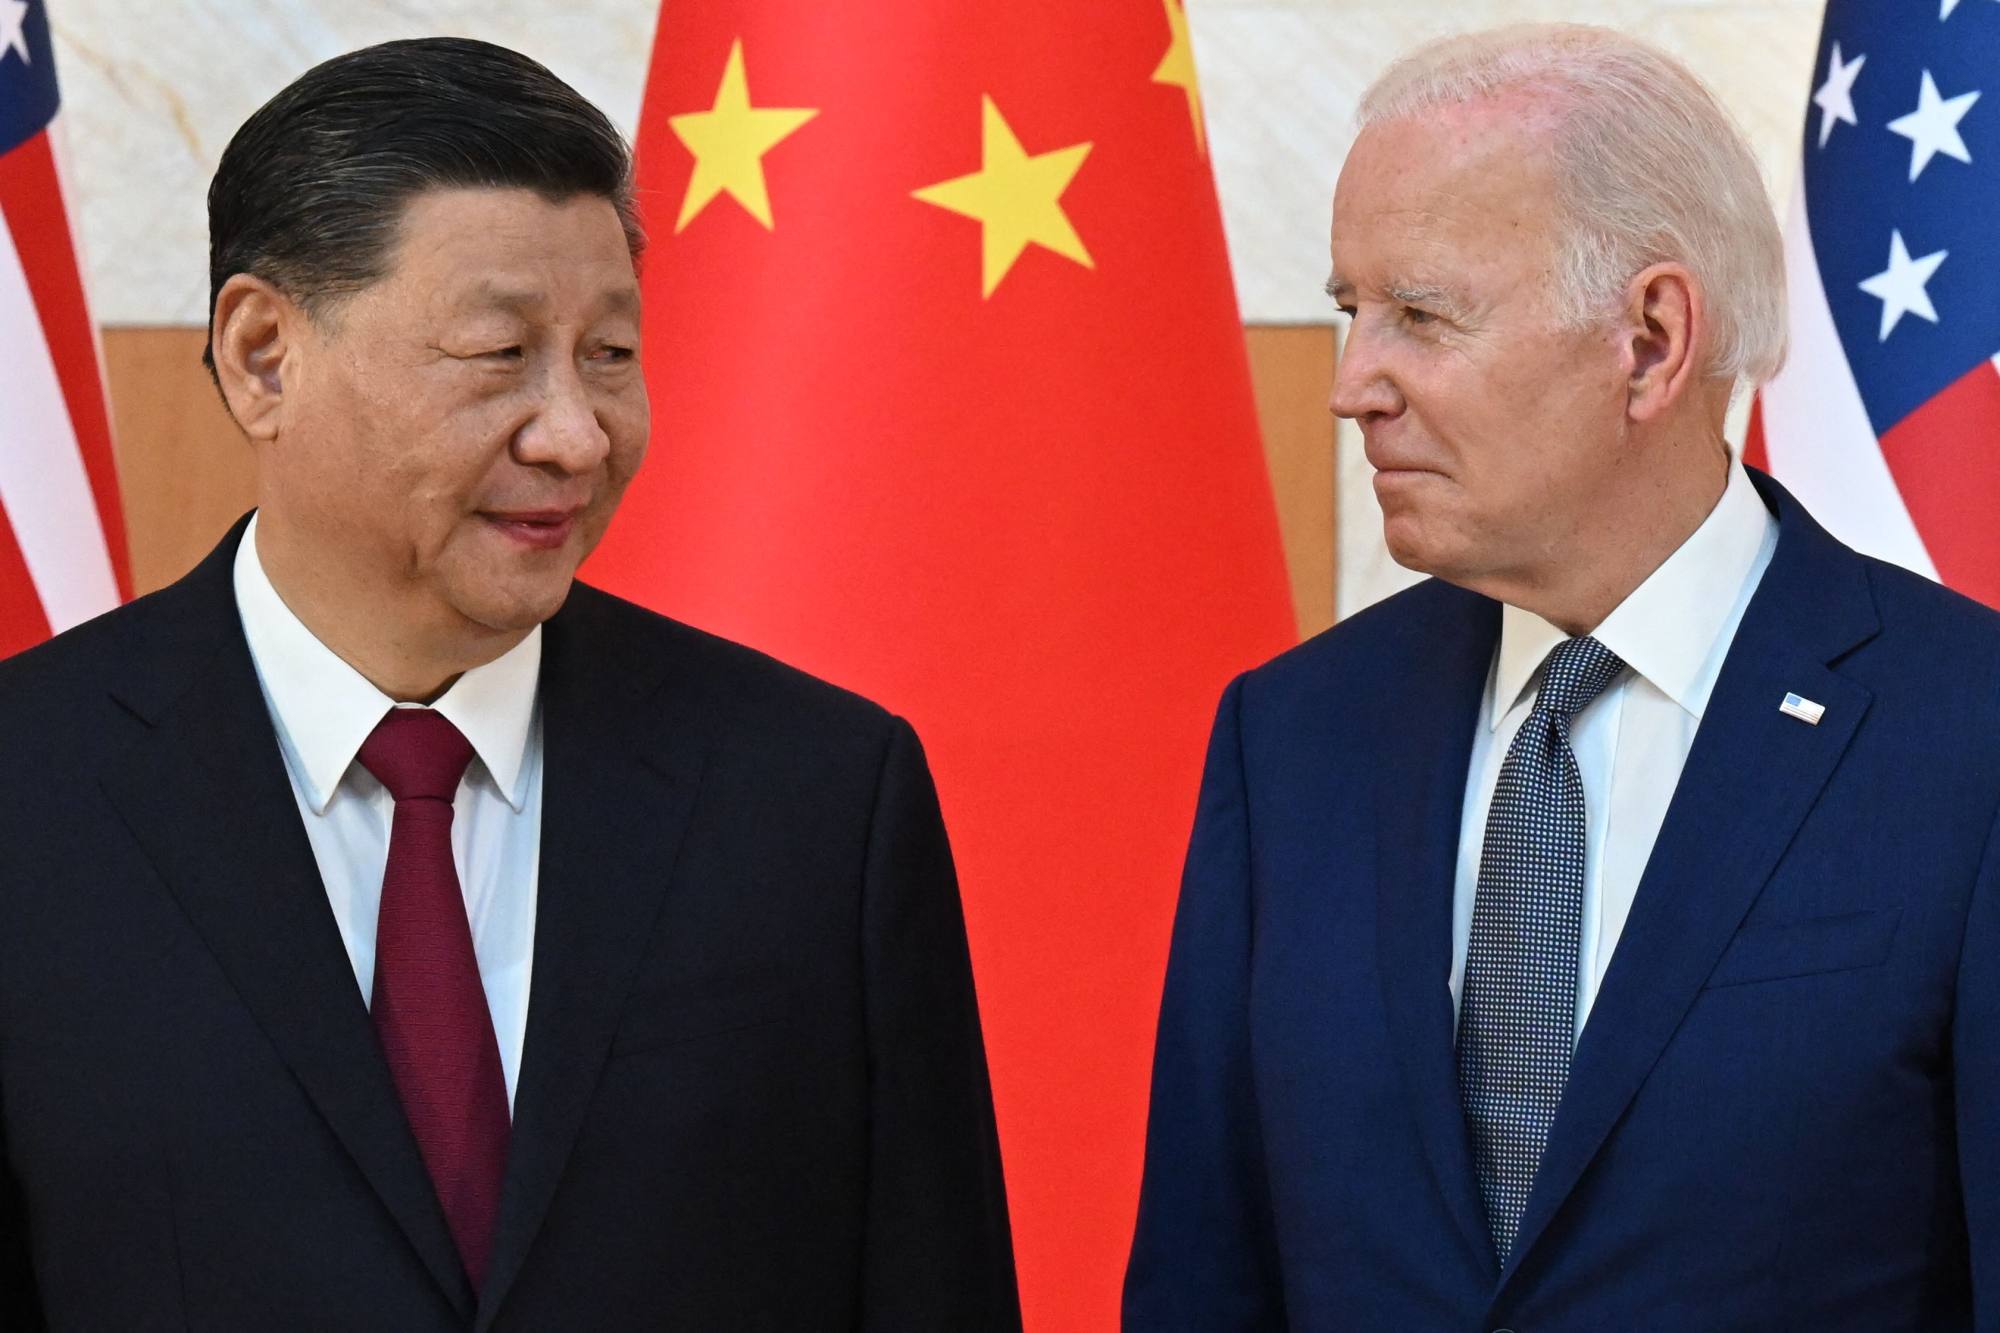 Chinese President Xi Jinping and US President Joe Biden, shown during a G20 session on November 14, 2022, spoke last week but apparently failed to resolve any major issues. Photo: AFP